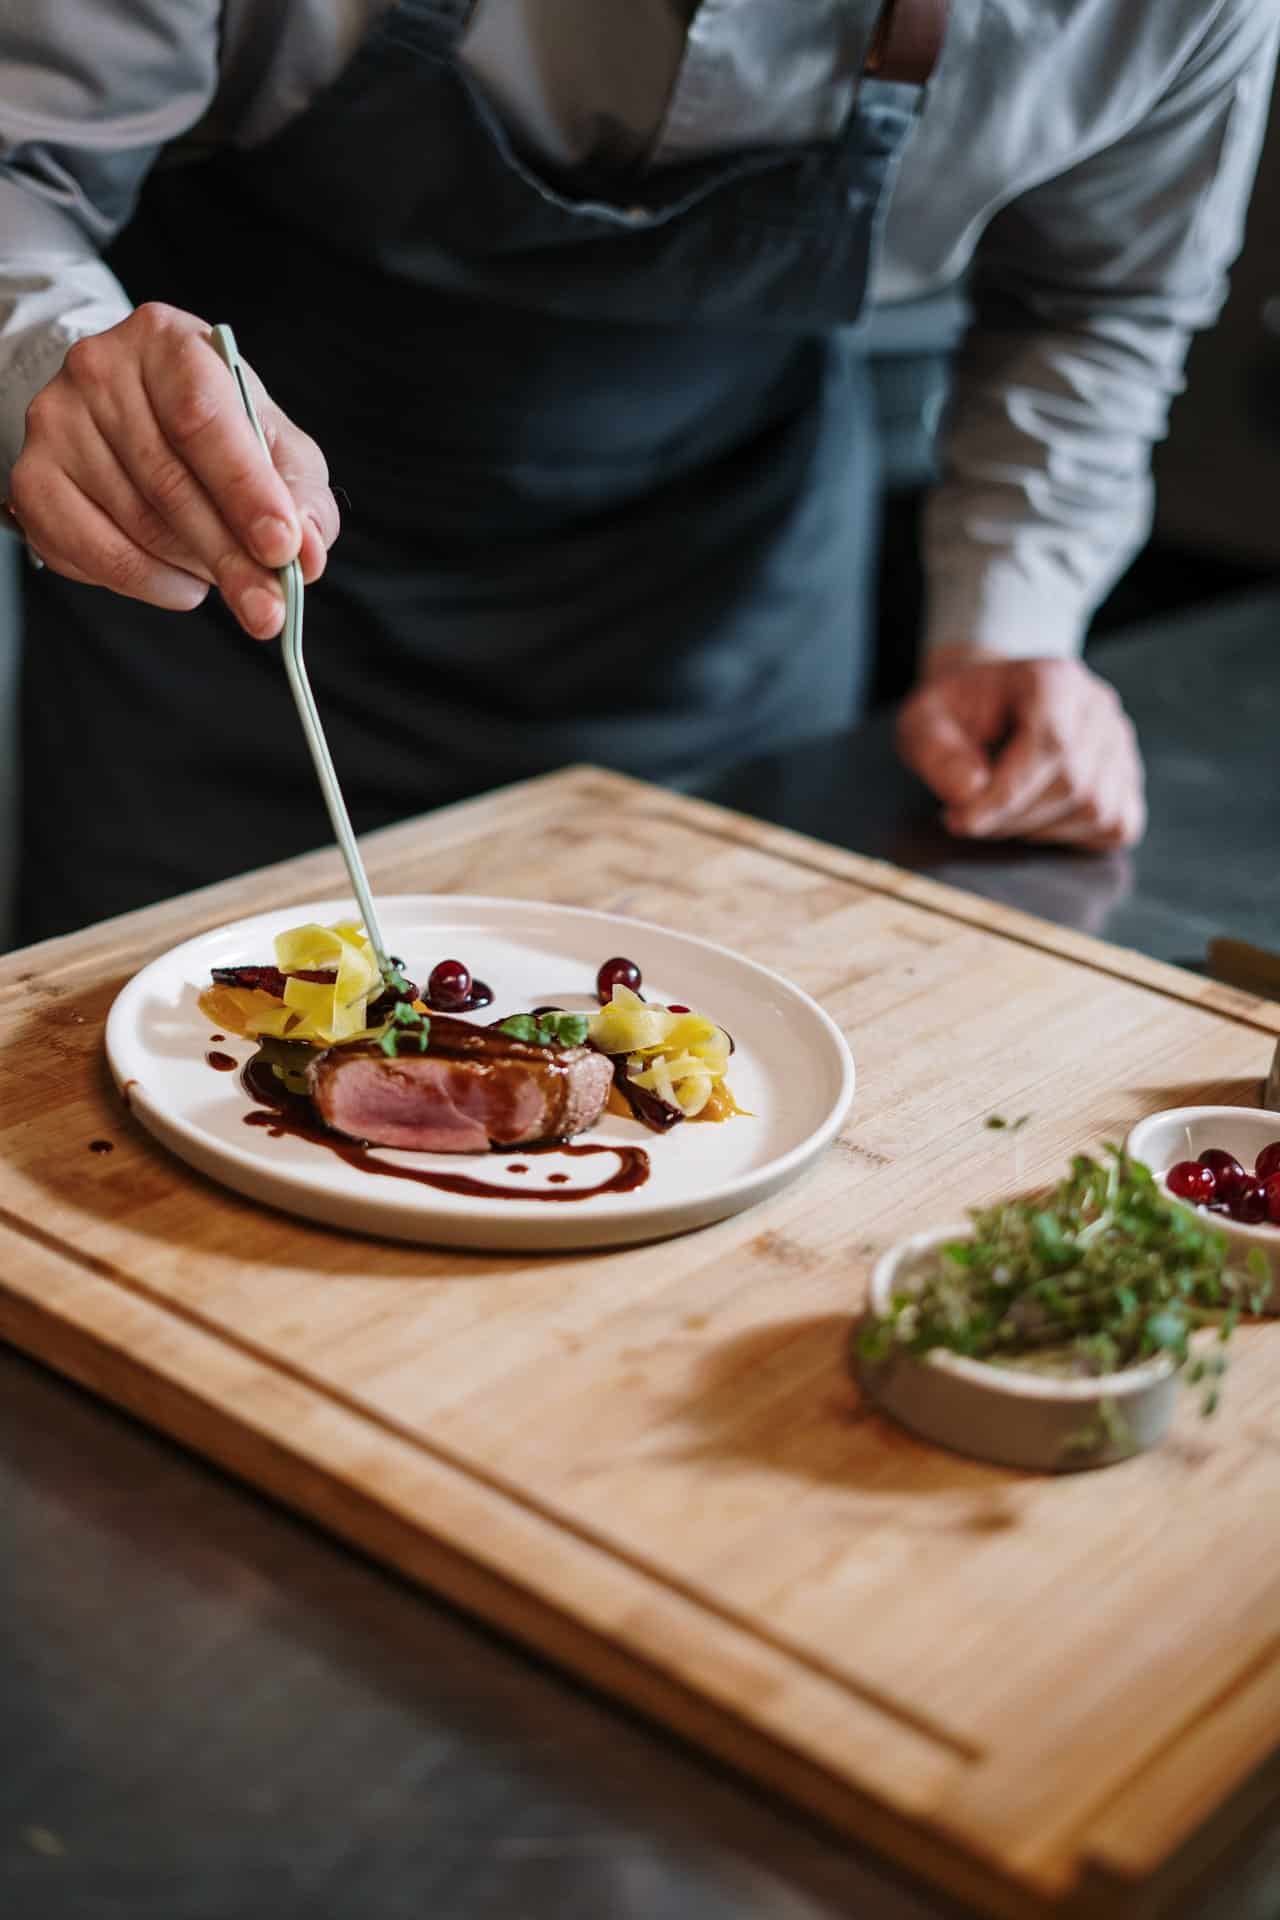 An image of a cooking experience and plating up a dish